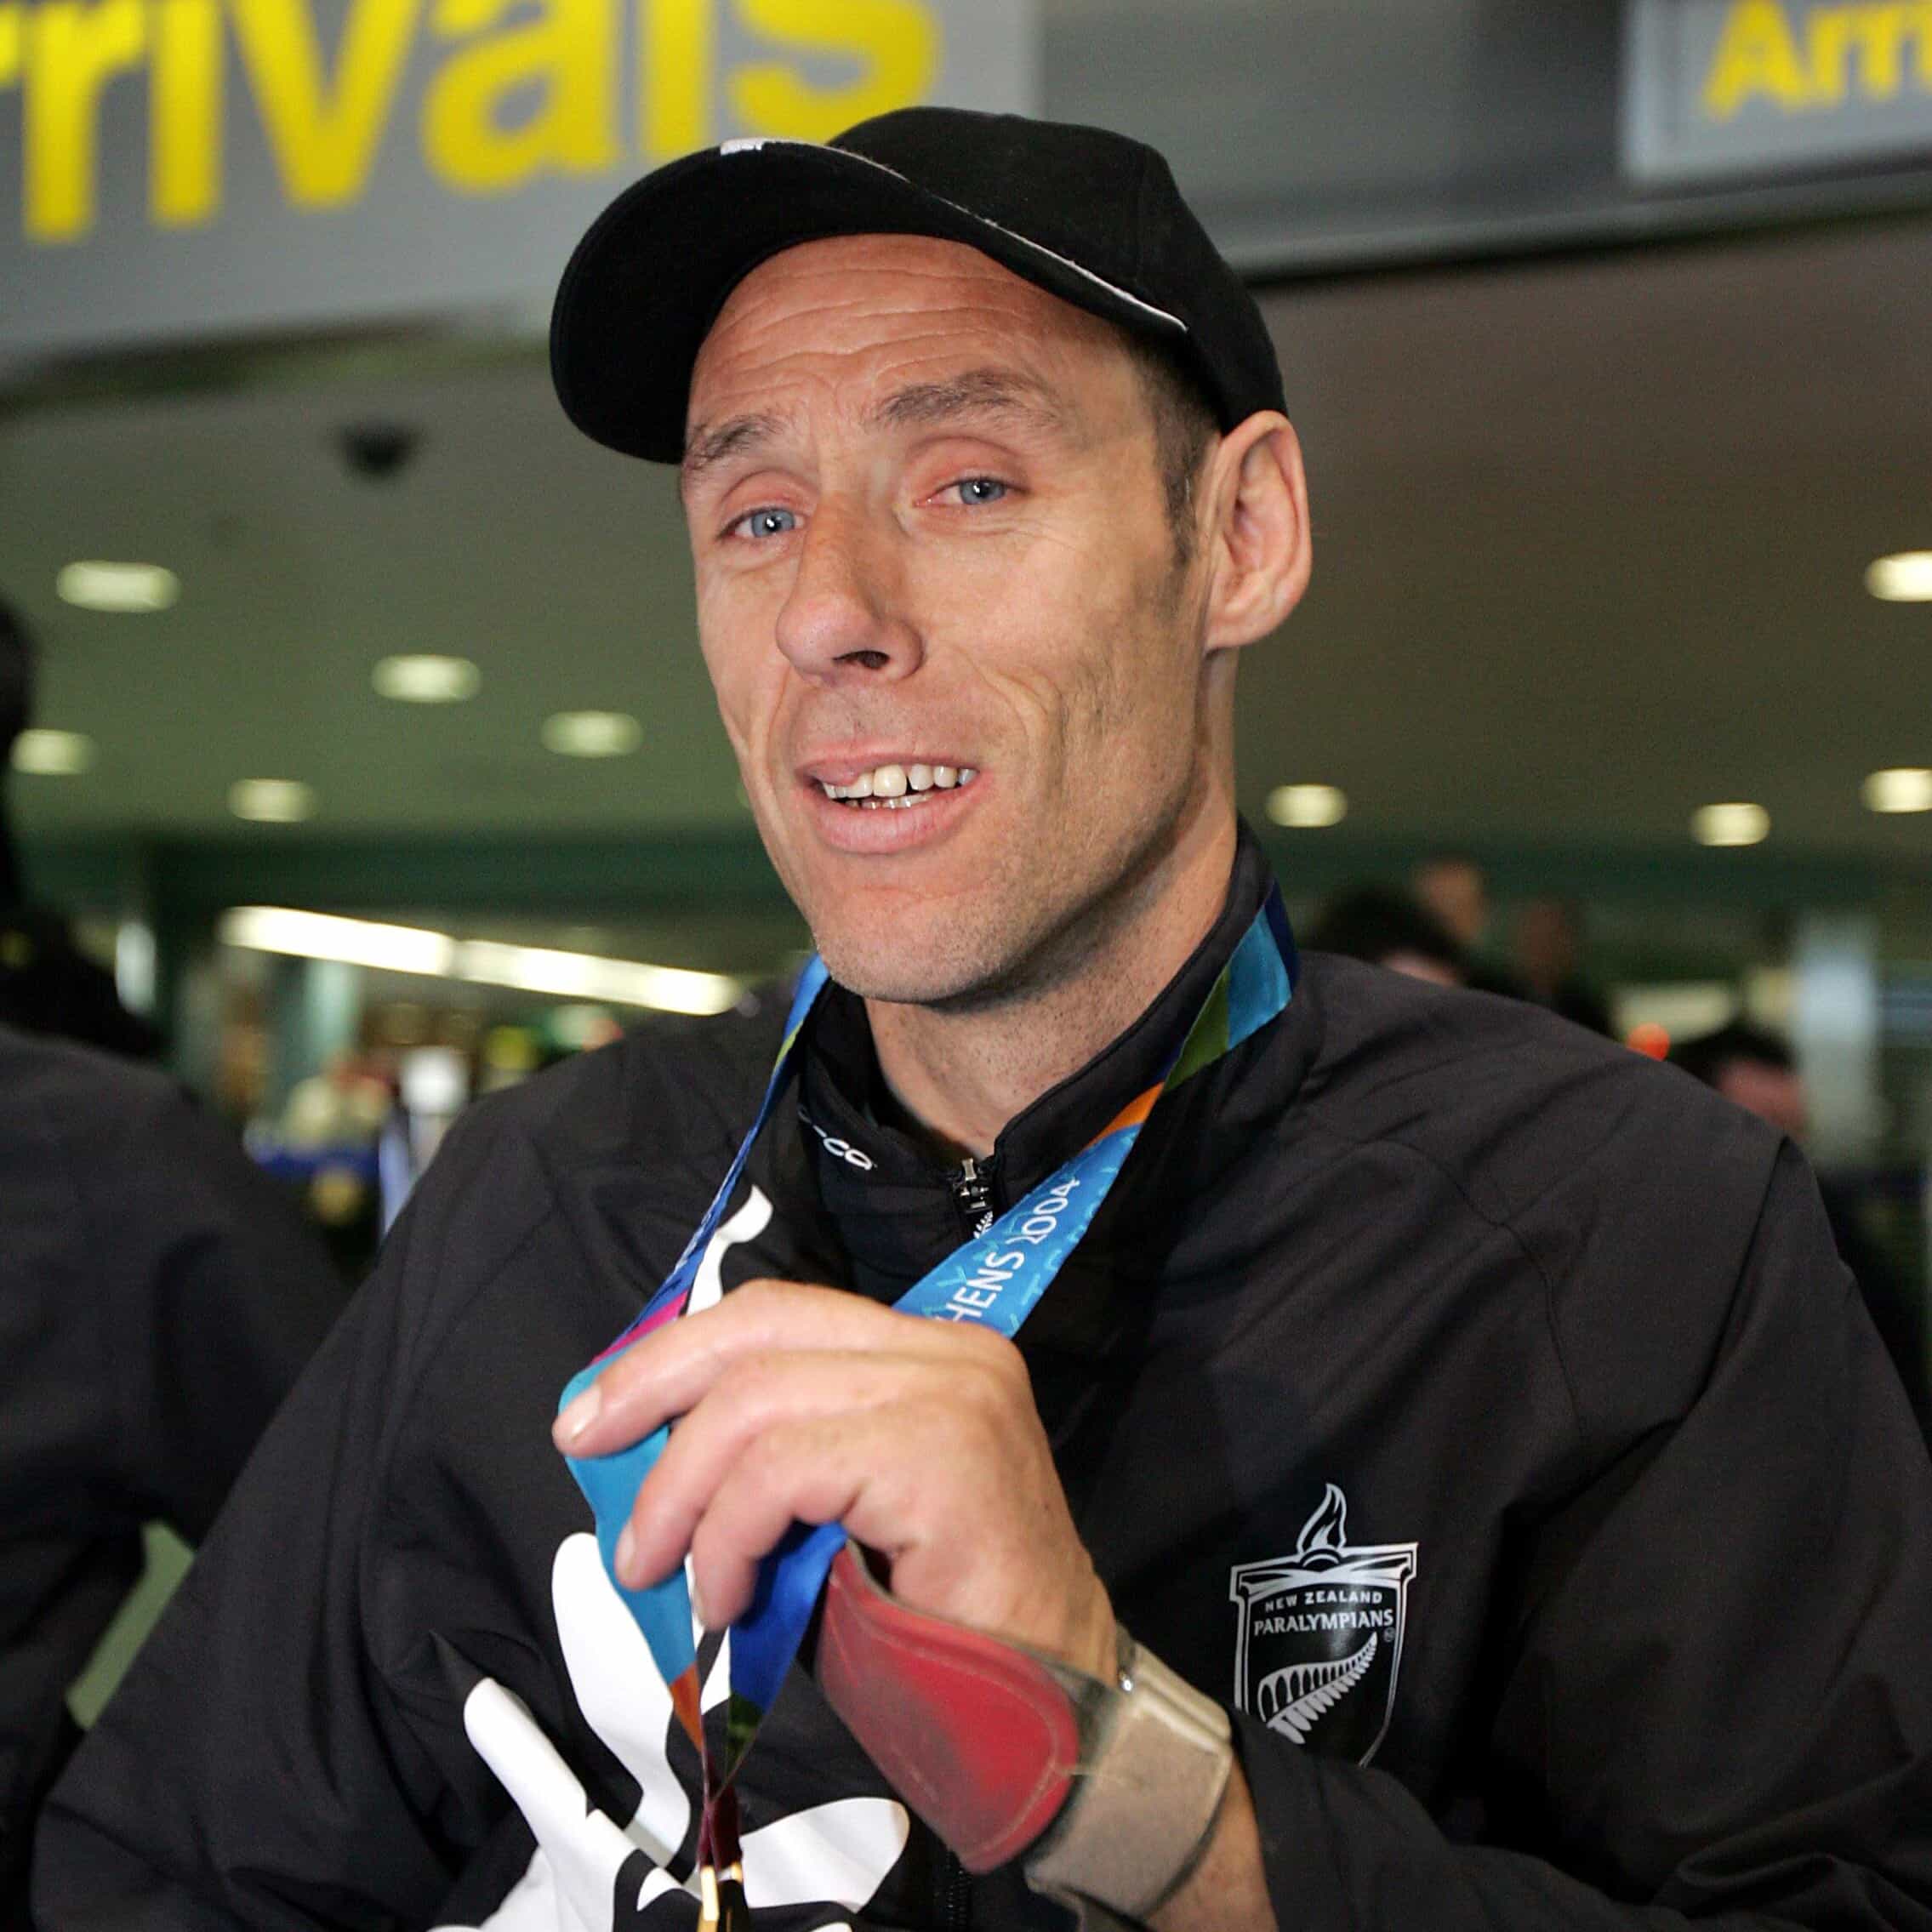 Wheelblack captain, Bill Oughton at the Auckland International Airport as the New Zealand Paralympic Team arrive home from Athens, Sunday October 3rd 2004. 
PHOTO: Hannah Johnston/PHOTOSPORT